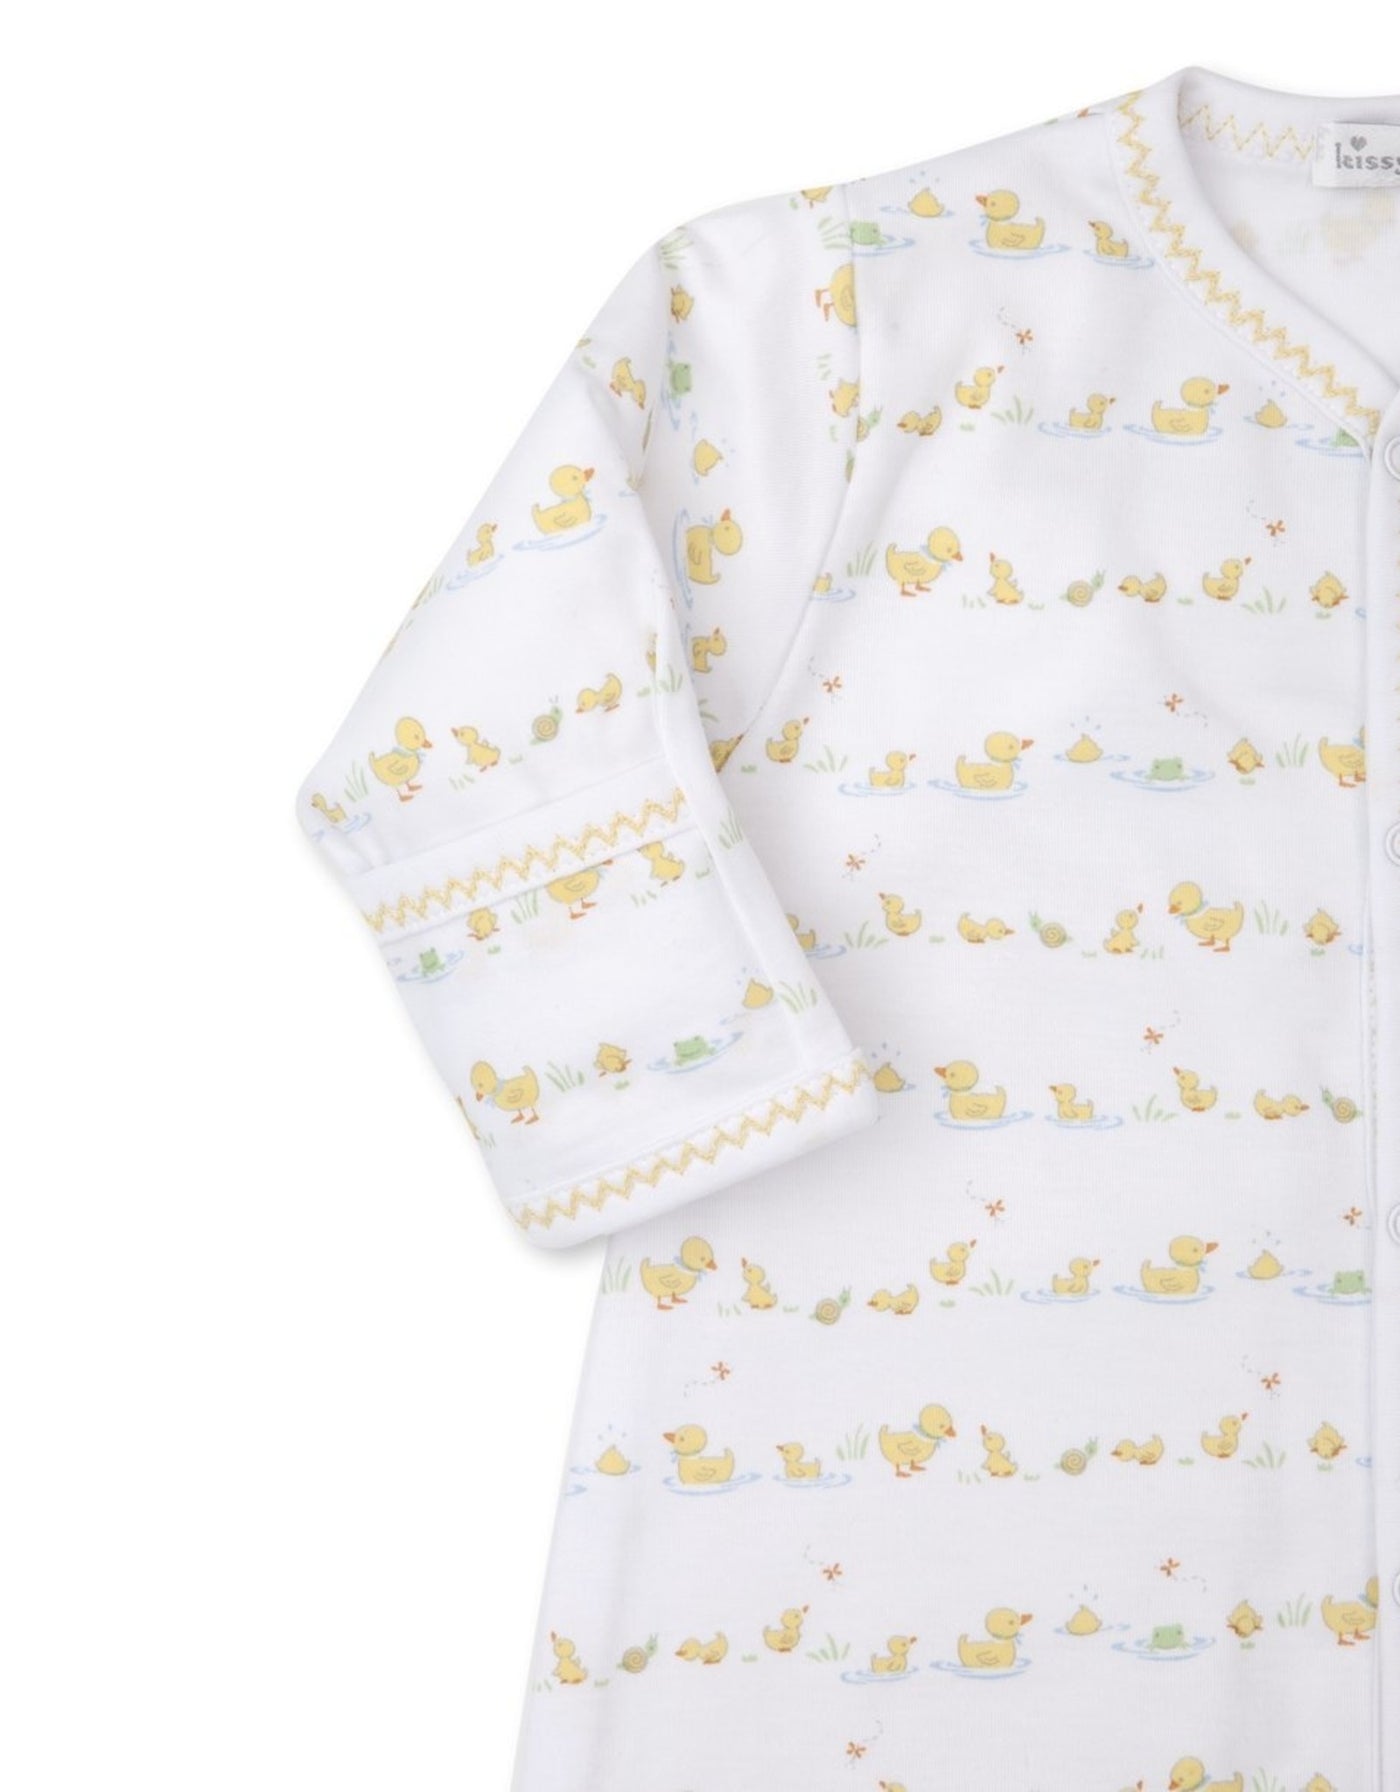 Dilly Dally Duckies Converter Gown